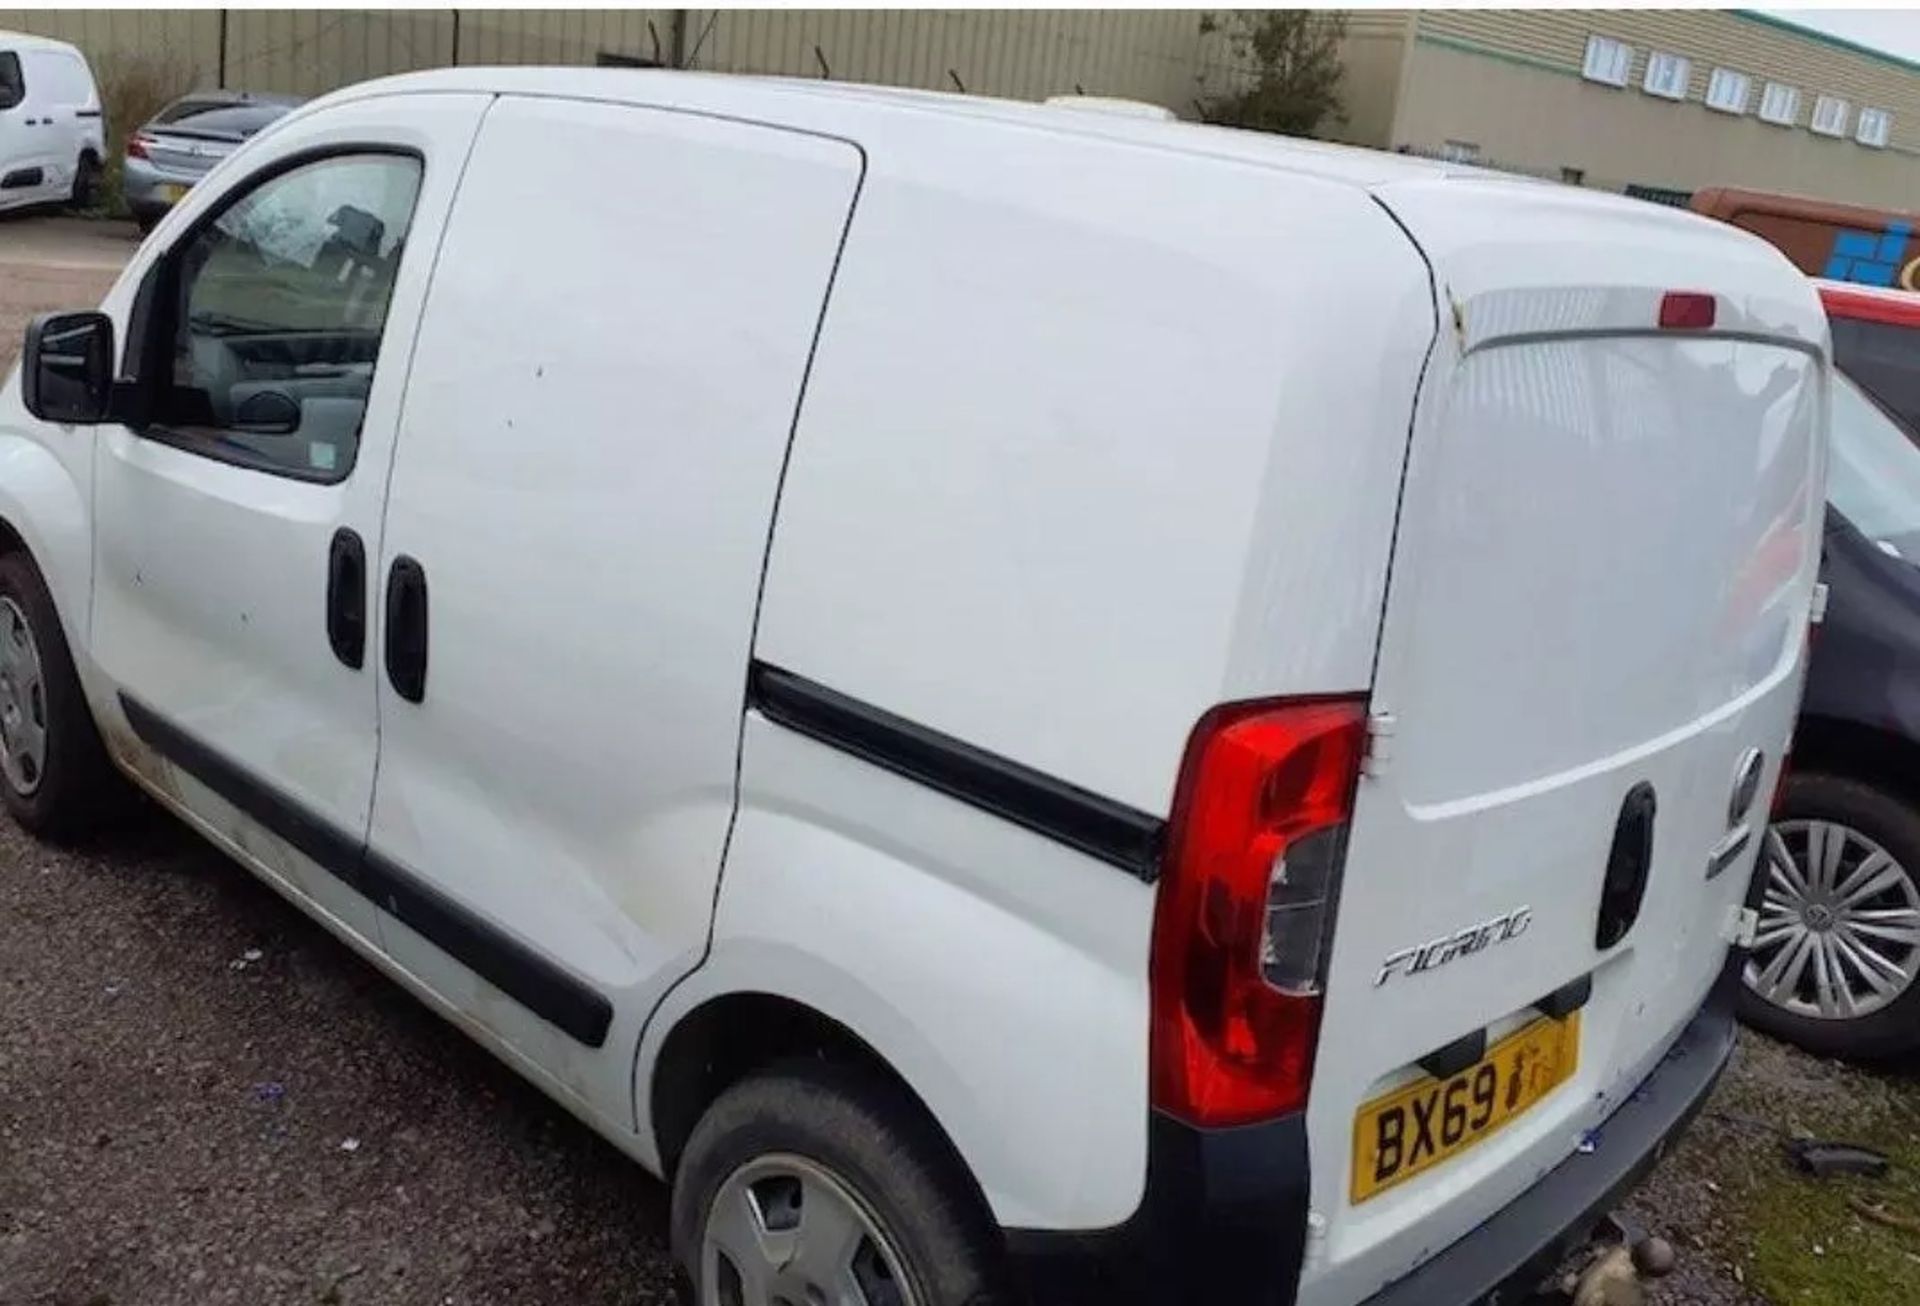 2019 FIAT FIORINO HDI VAN - 1 OWNER, SOLD AS NON-RUNNER, V5 LOG BOOK PRESENT (SPARES OR REPAIRS) - Image 3 of 7